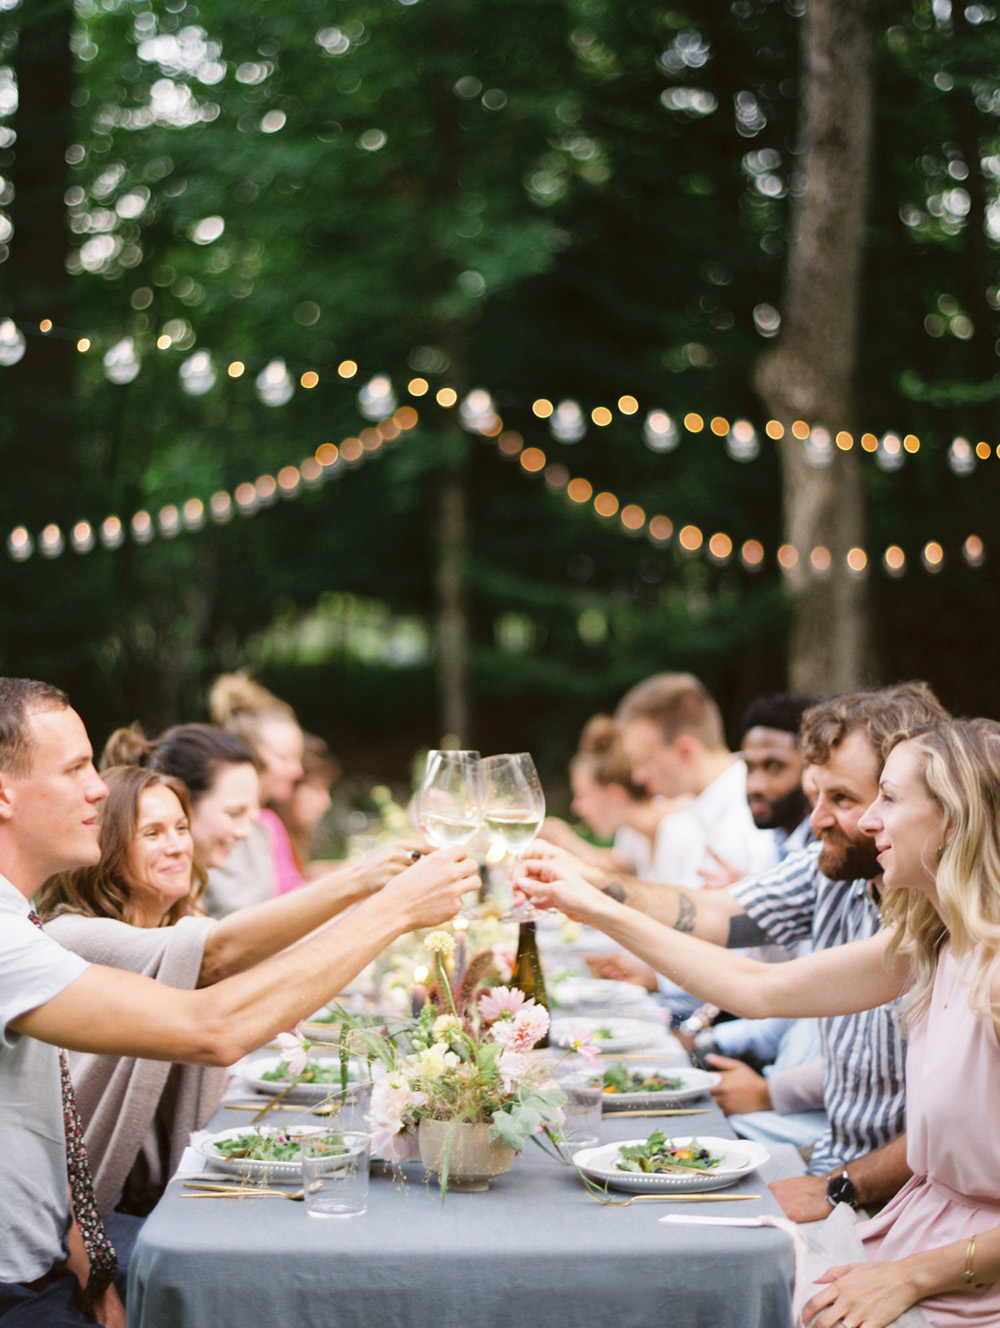 guests cheers Living roots wine at a long table wedding rehearsal dinner outside under string cafe lights | Mary Dougherty Workshop Saranac Lake New York